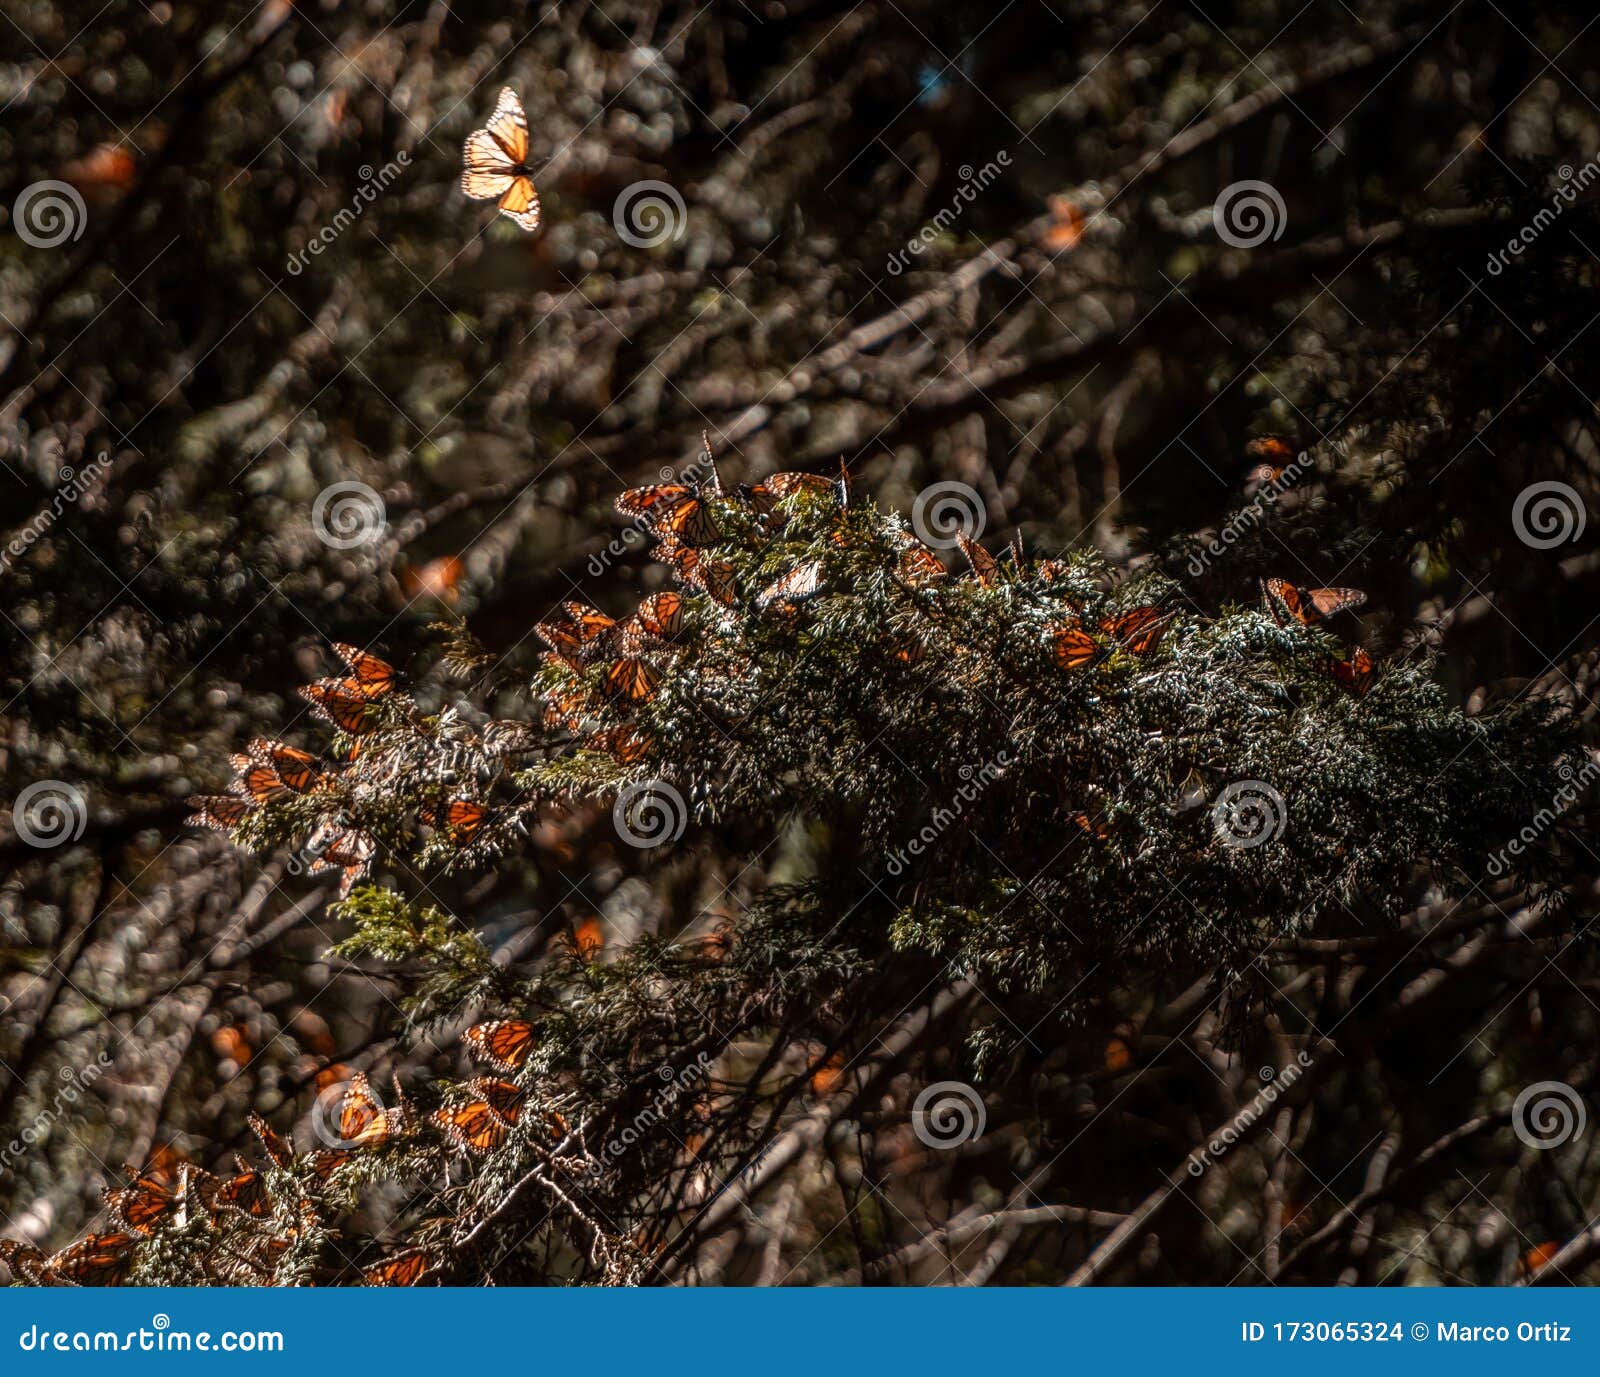 monarch butterflies danaus plexippus grouped together in a pine tree to conserve heat in a cluster, in the mexican sanctuary